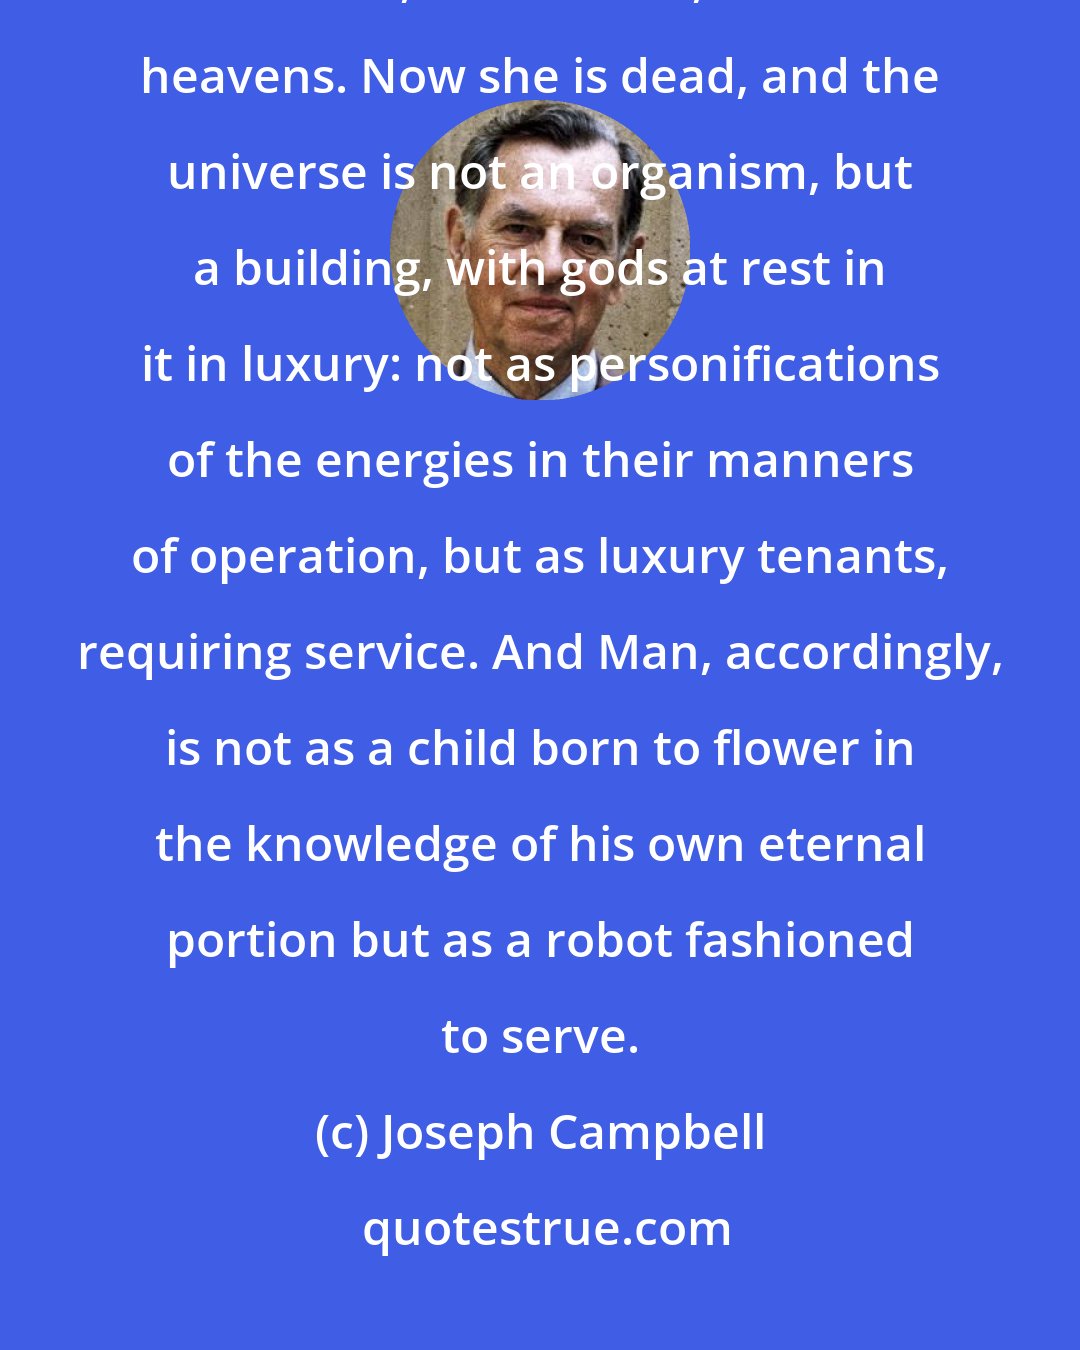 Joseph Campbell: In the older view the goddess Universe was alive, herself organically the Earth, the horizon, and the heavens. Now she is dead, and the universe is not an organism, but a building, with gods at rest in it in luxury: not as personifications of the energies in their manners of operation, but as luxury tenants, requiring service. And Man, accordingly, is not as a child born to flower in the knowledge of his own eternal portion but as a robot fashioned to serve.